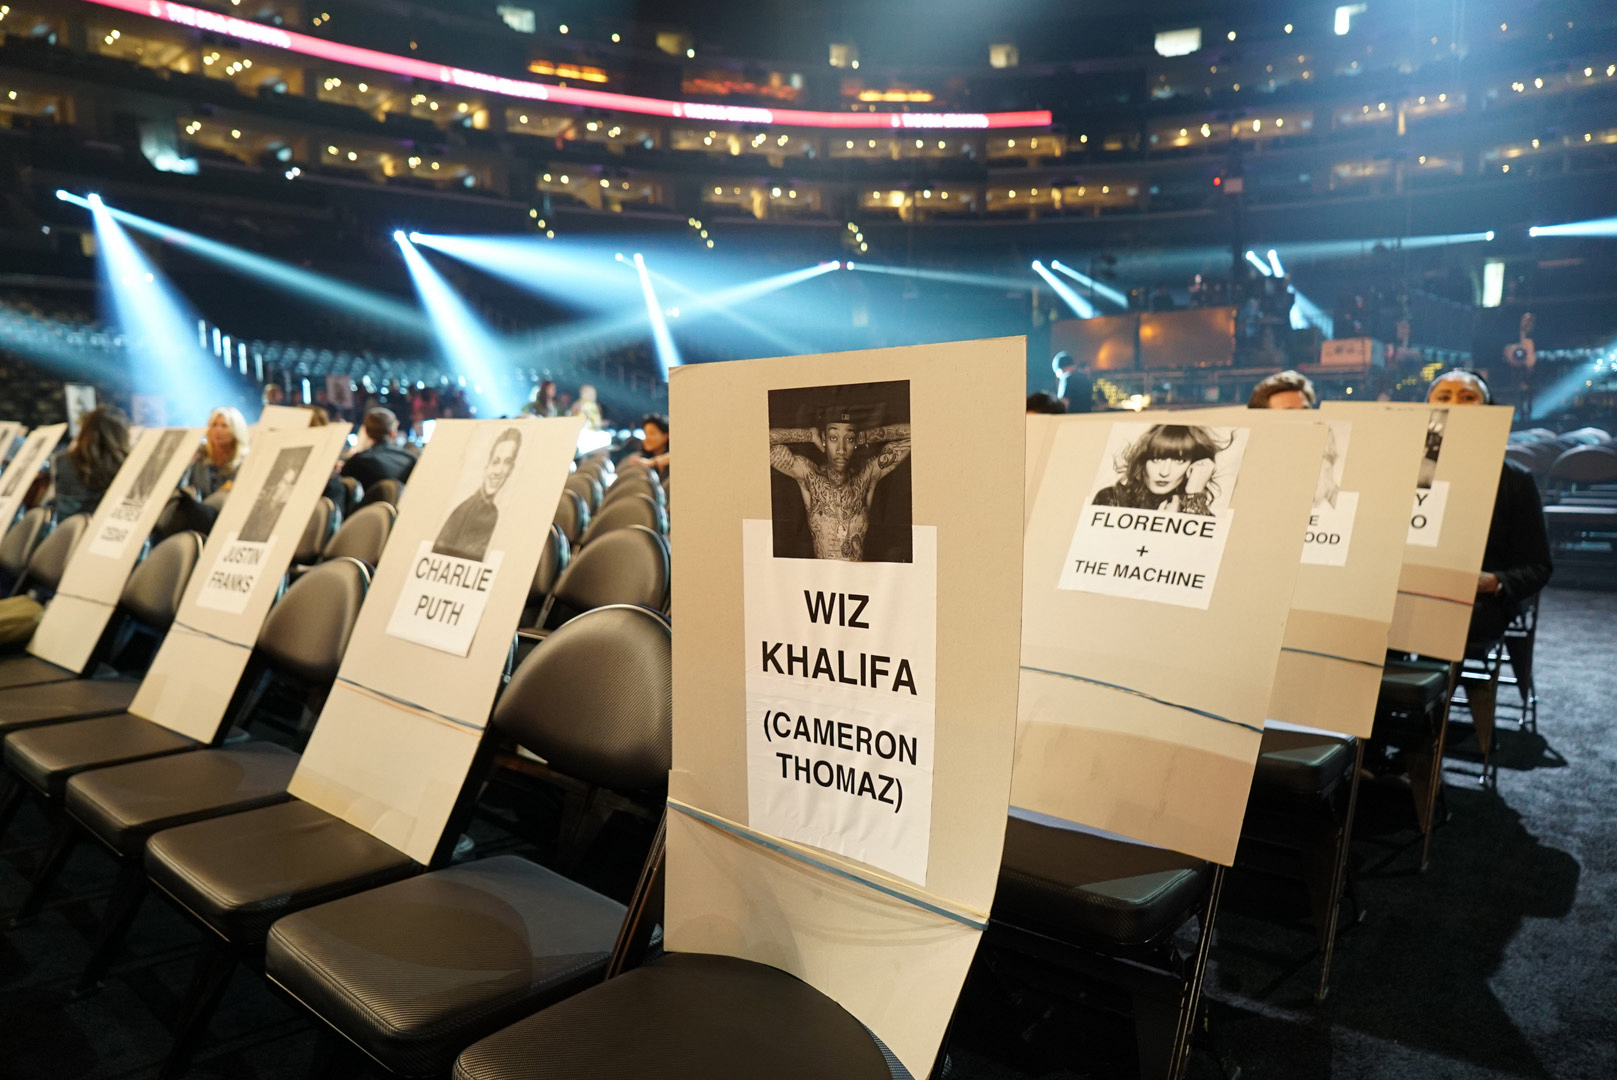 Wiz Khalifa and Florence The Machine will be sitting cozy next to each other